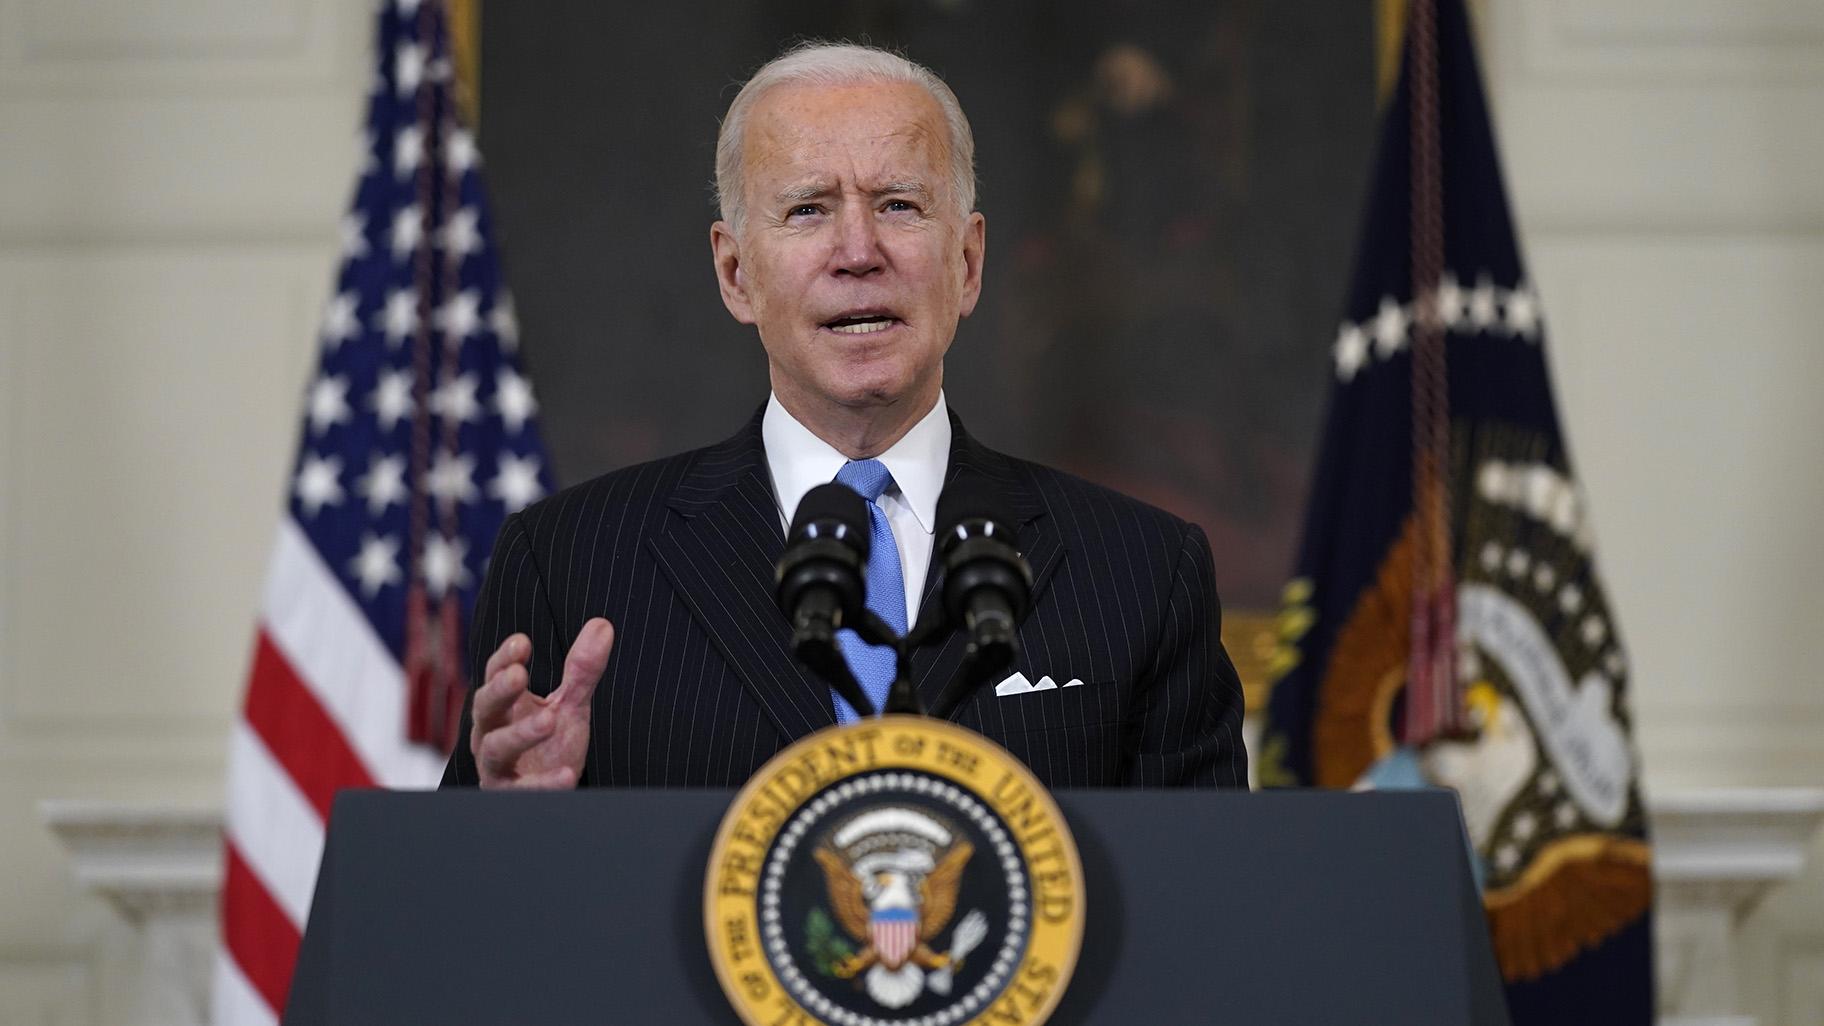 President Joe Biden speaks about efforts to combat COVID-19, in the State Dining Room of the White House, Tuesday, March 2, 2021, in Washington. (AP Photo / Evan Vucci)